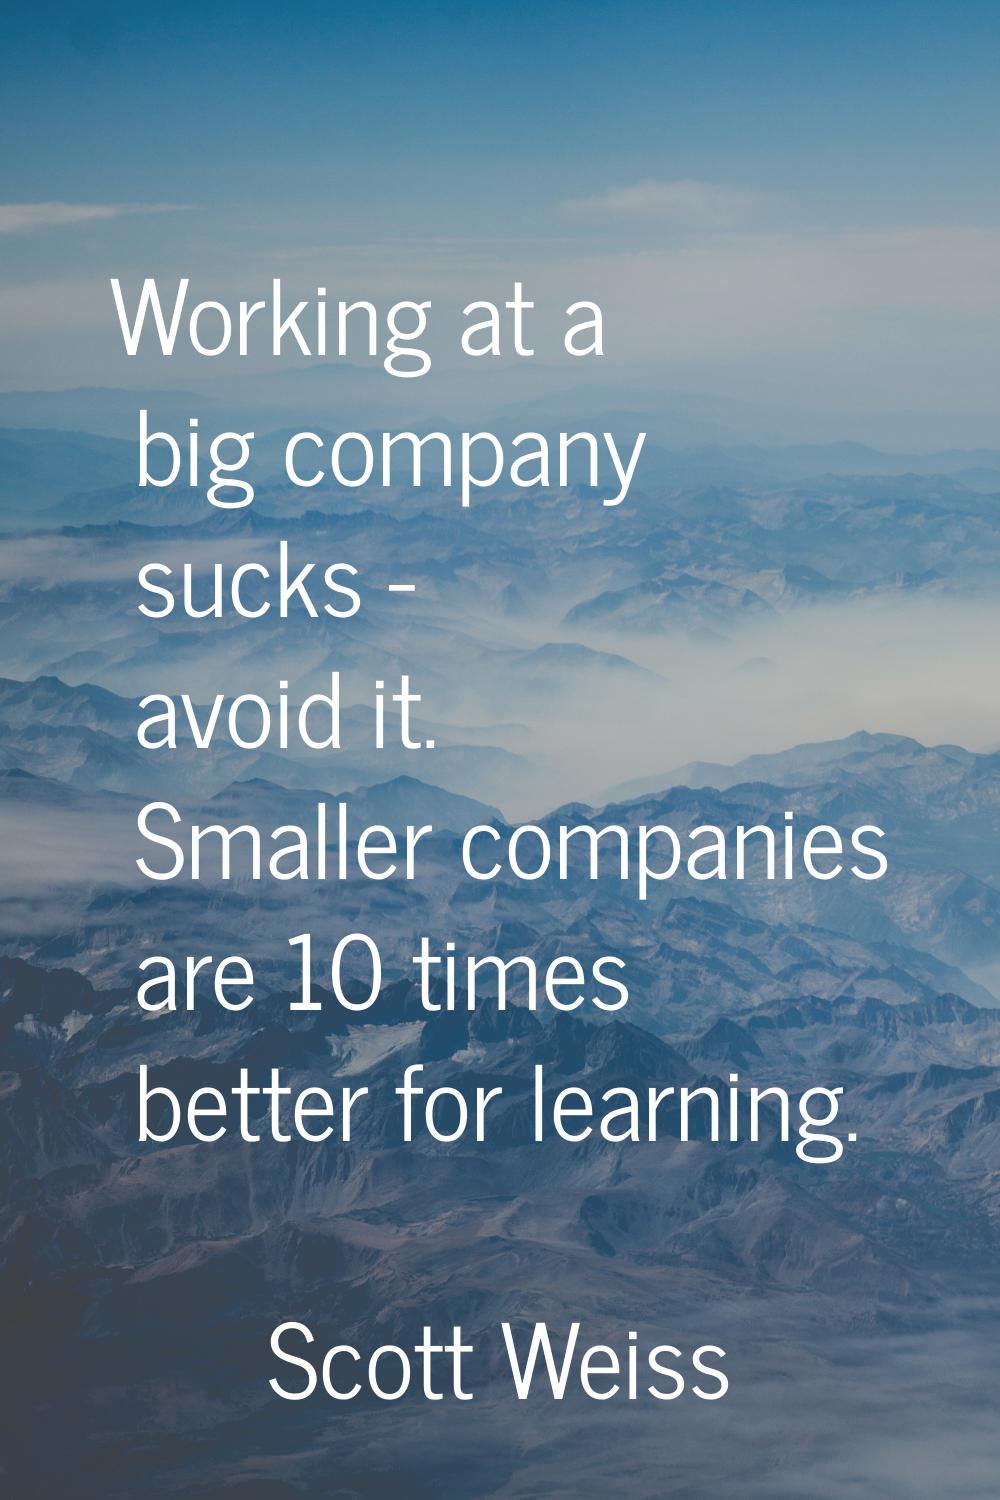 Working at a big company sucks - avoid it. Smaller companies are 10 times better for learning.